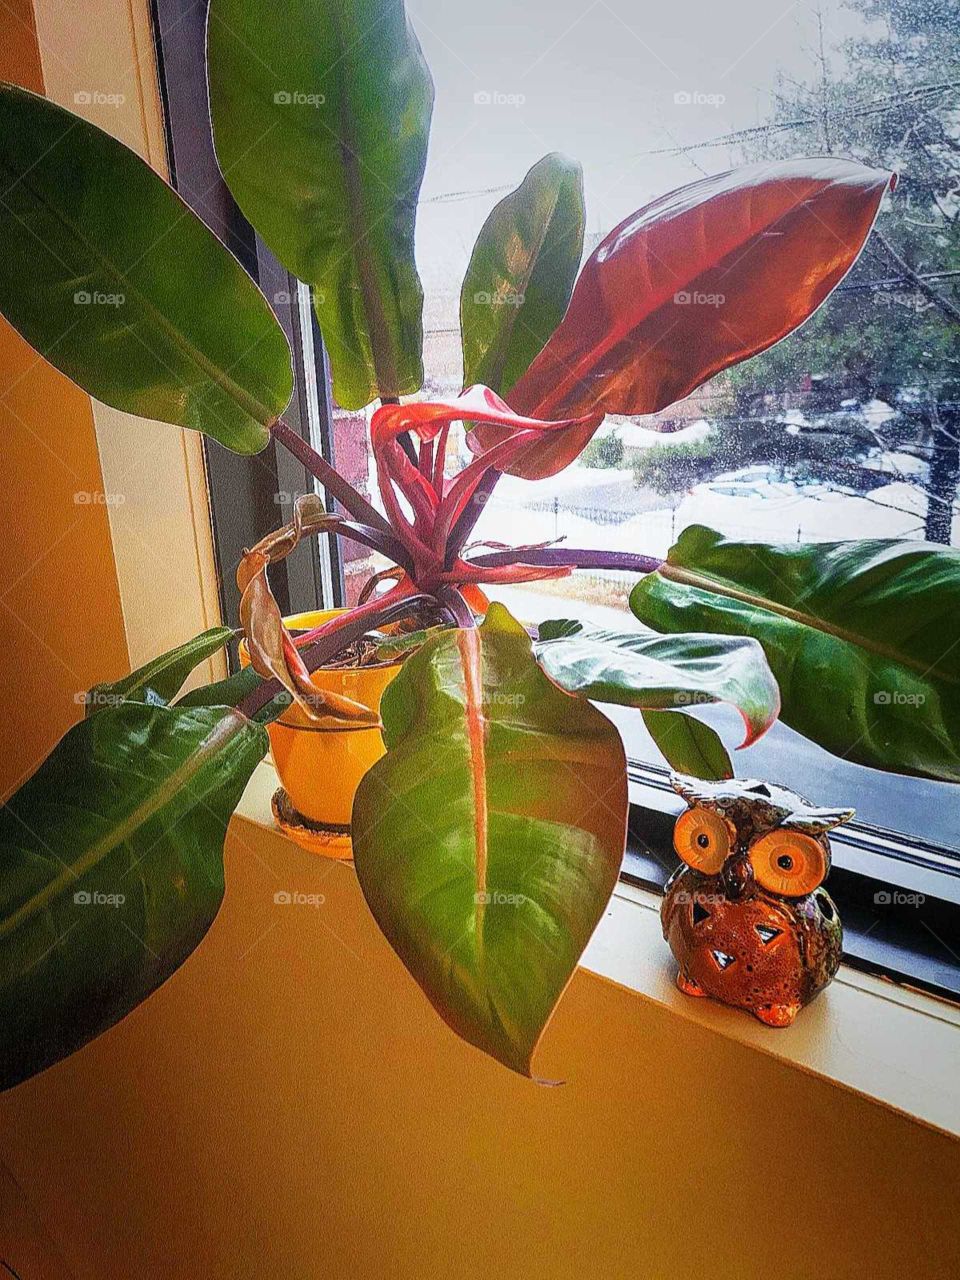 green plant near a window with an owl